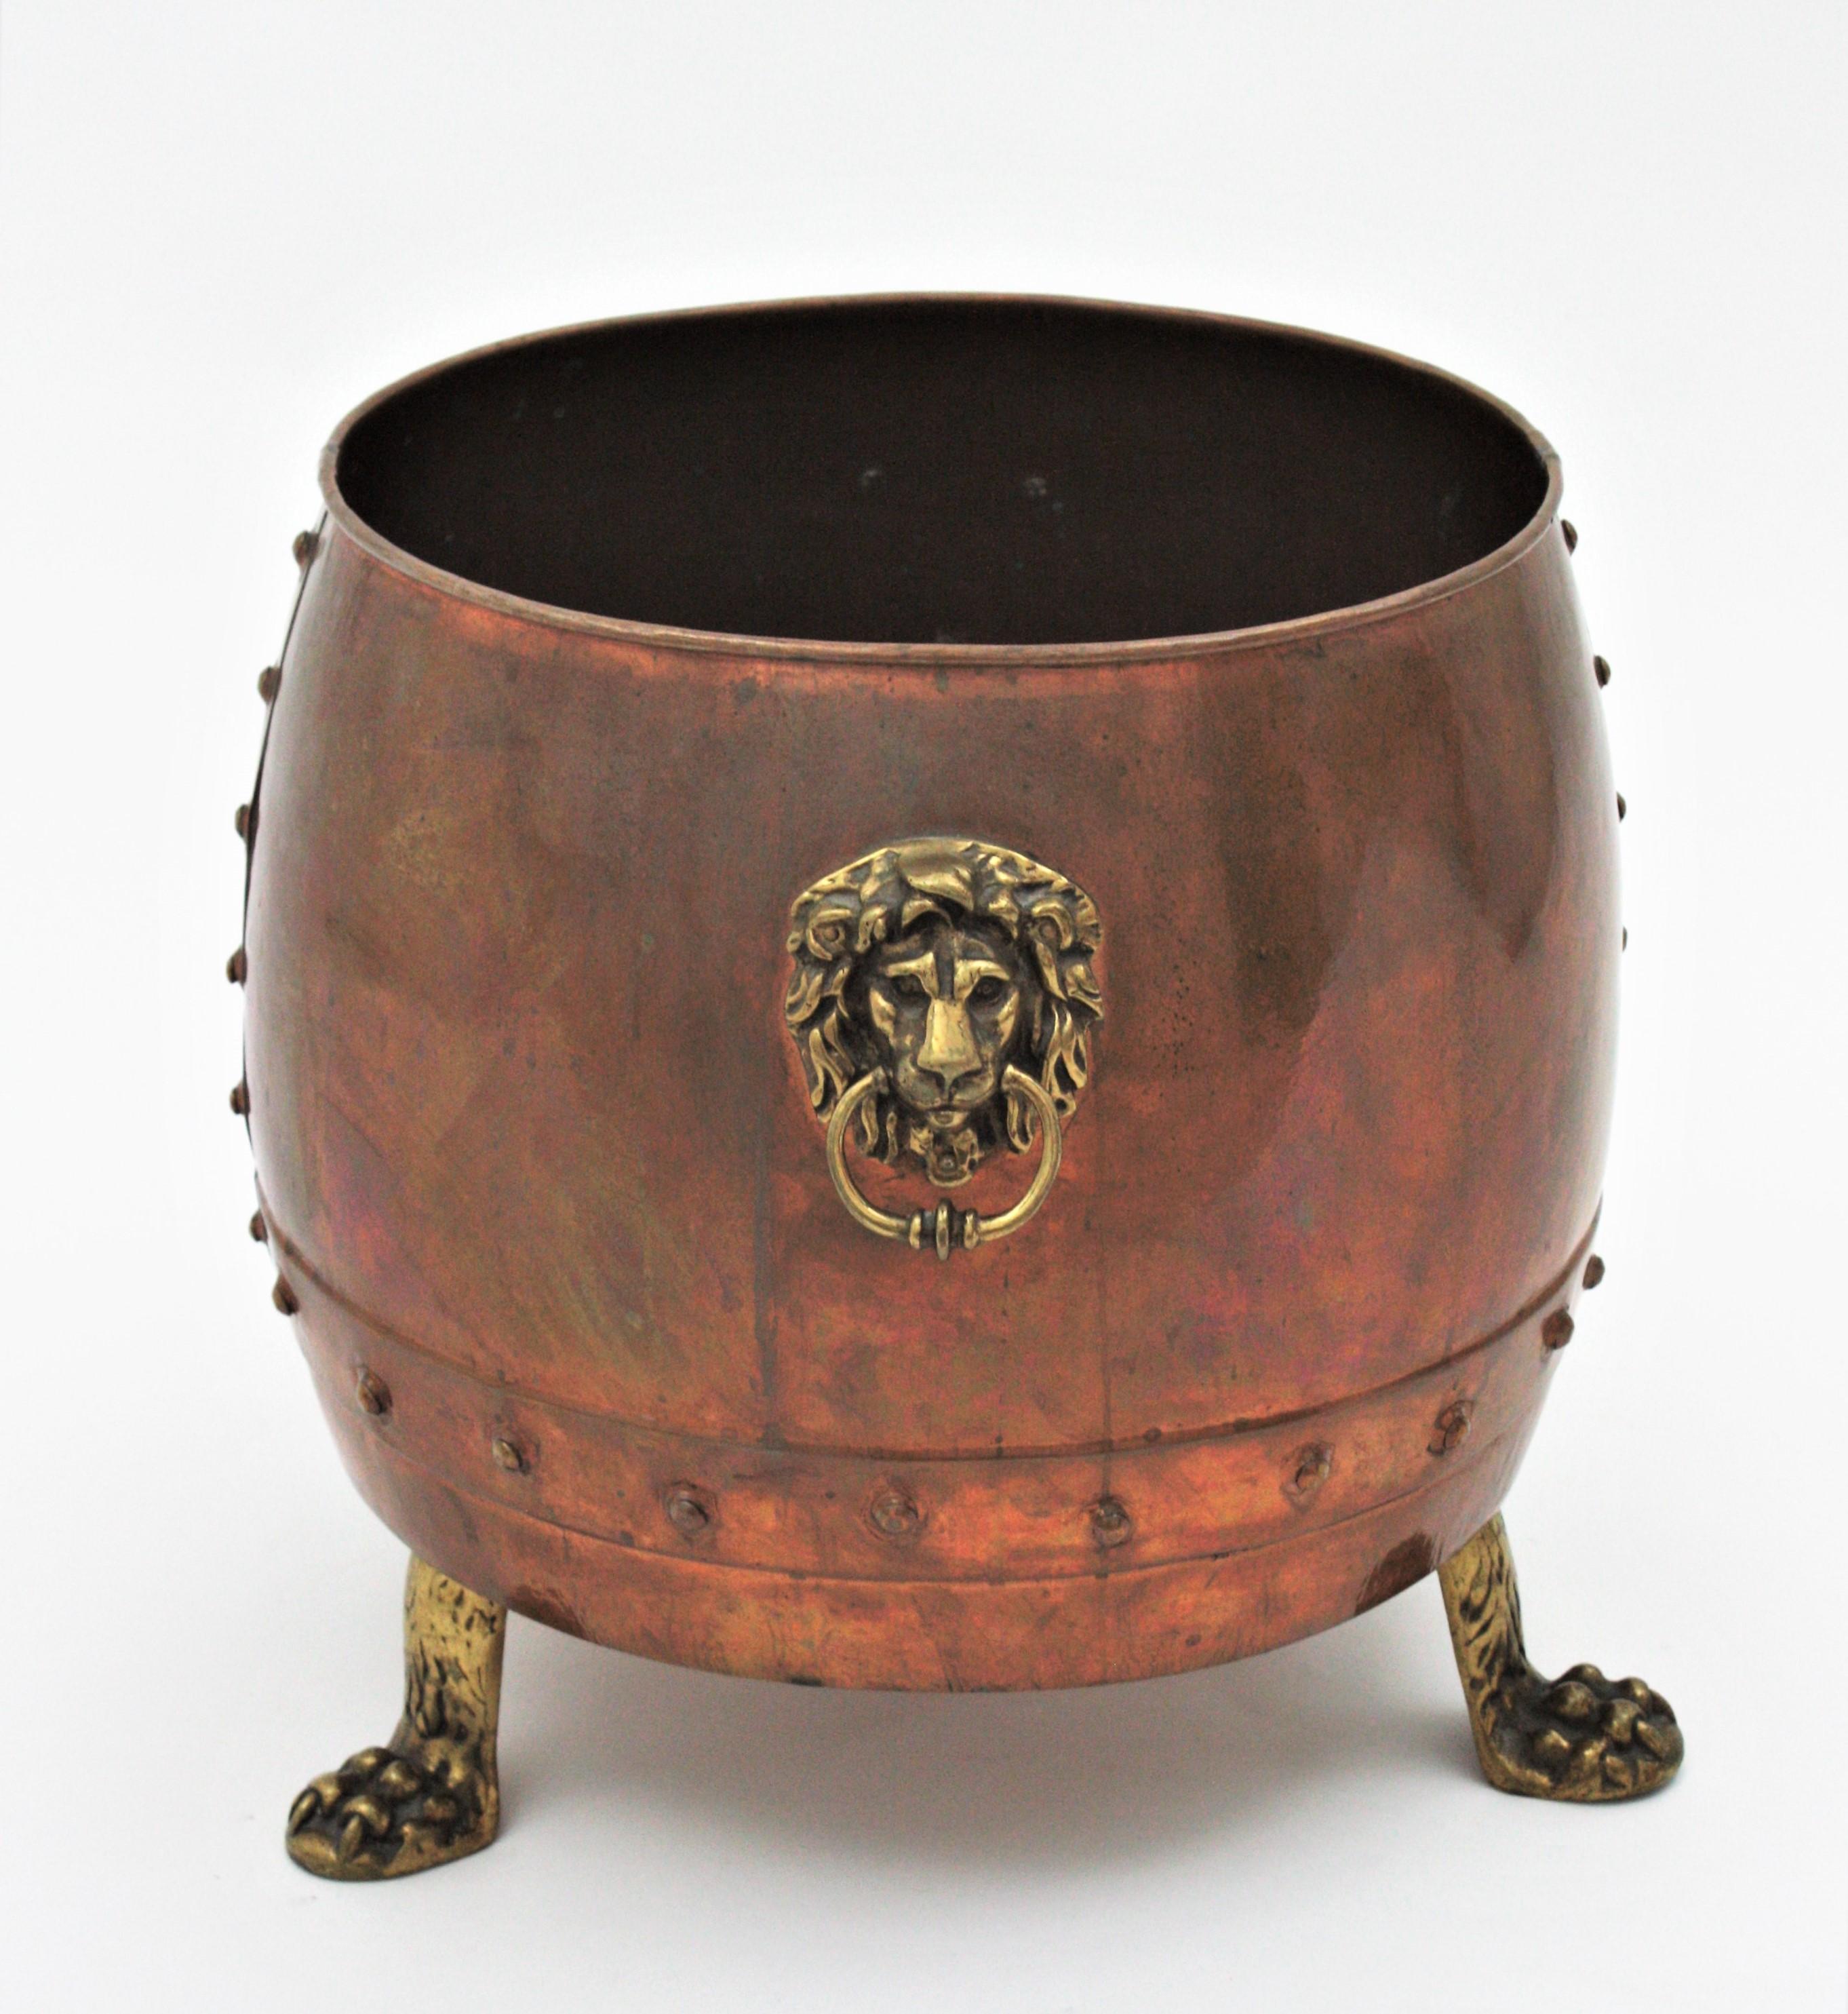 20th Century French Copper Cauldron Champagne Cooler or Planter with Lion Heads